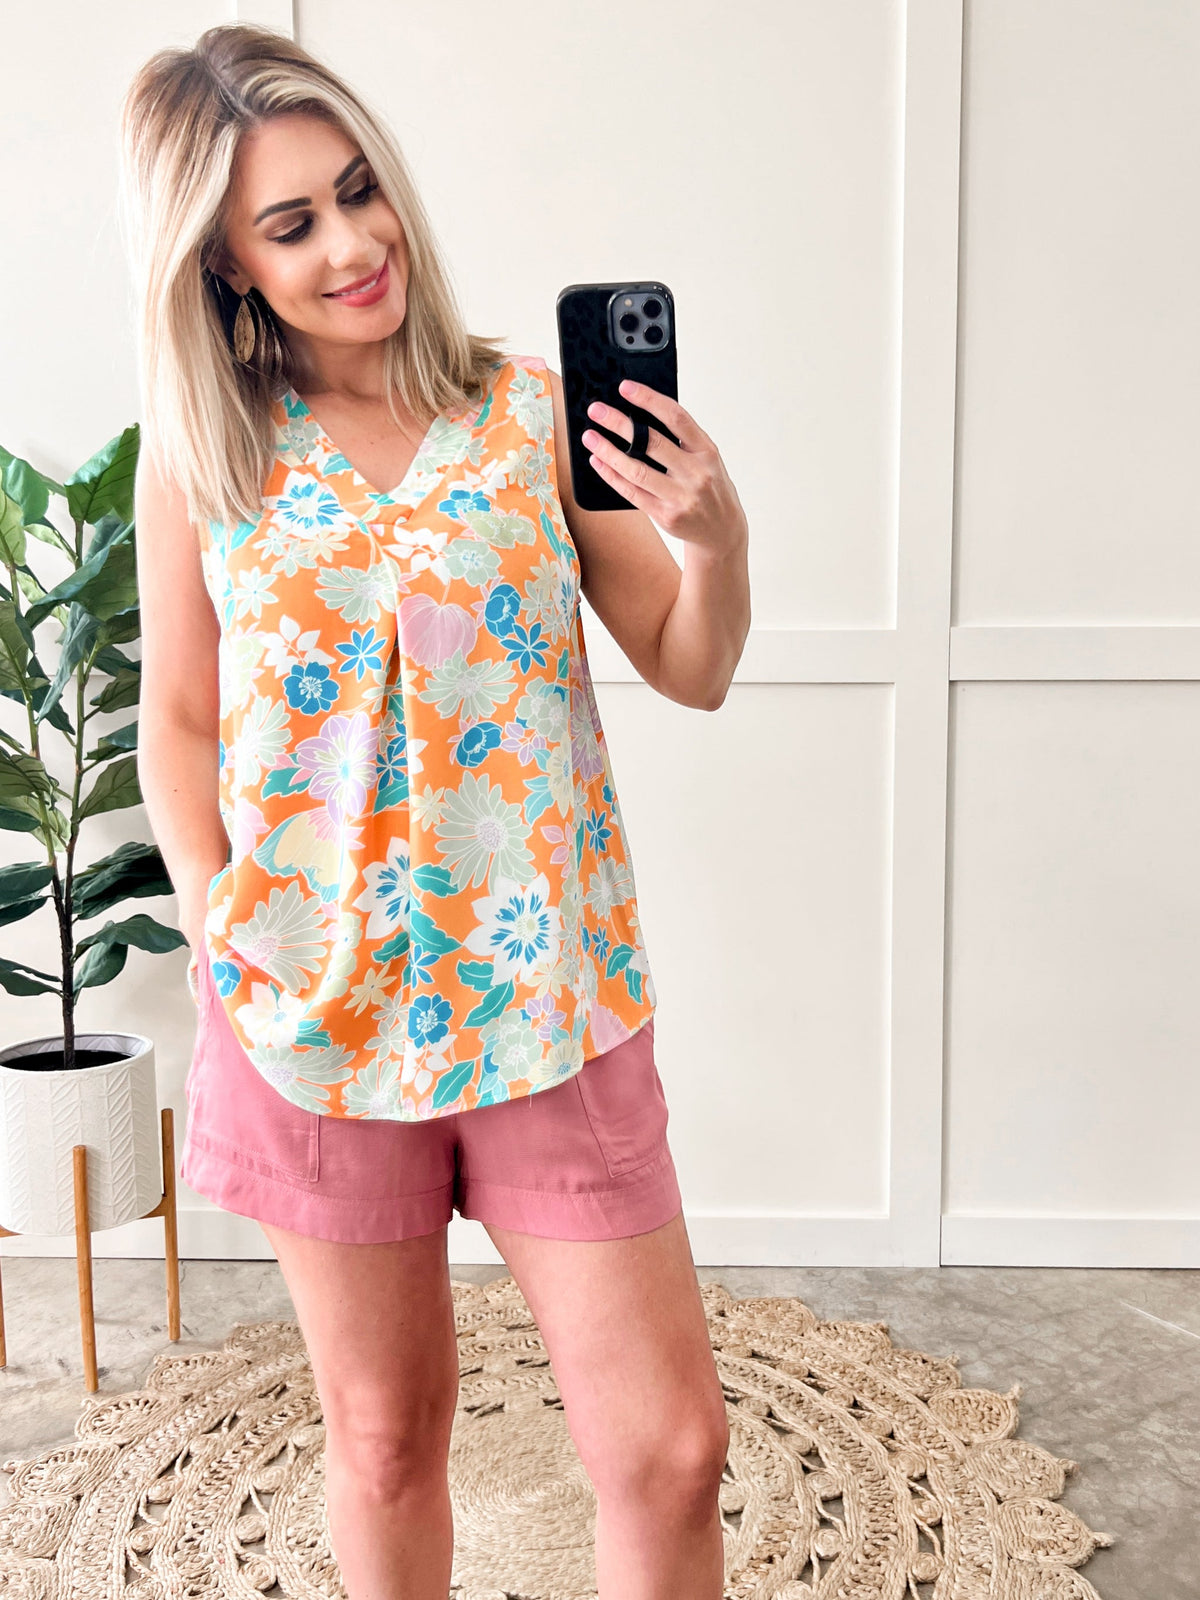 Gabby Sleeveless Floral Top In Turquoise & Tangerine  * Sample Sale